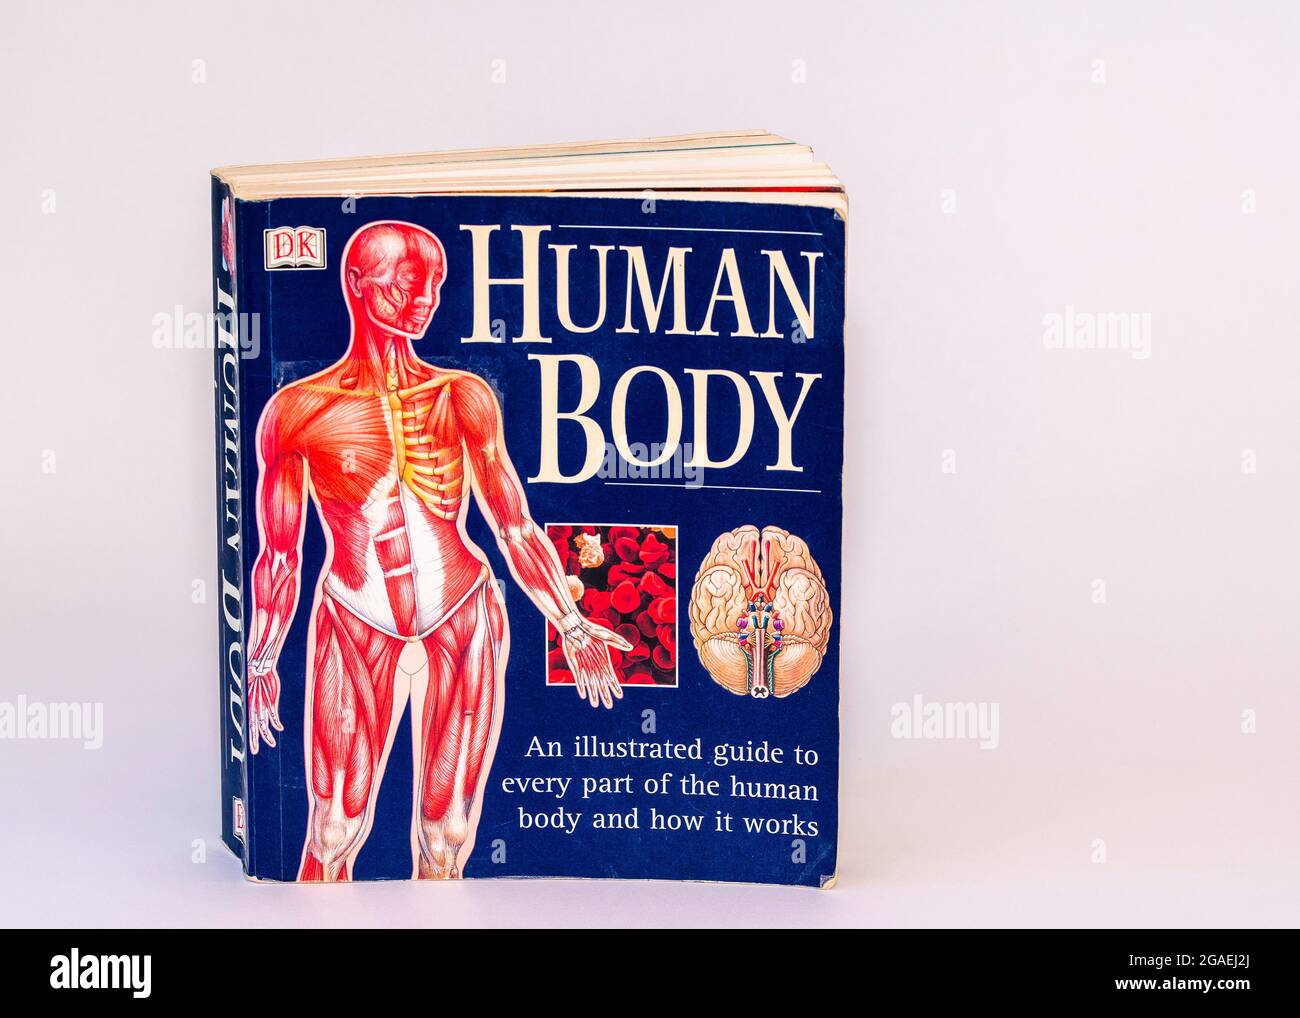 An illustrated guide to every part of the human body and how it works paperback book Stock Photo